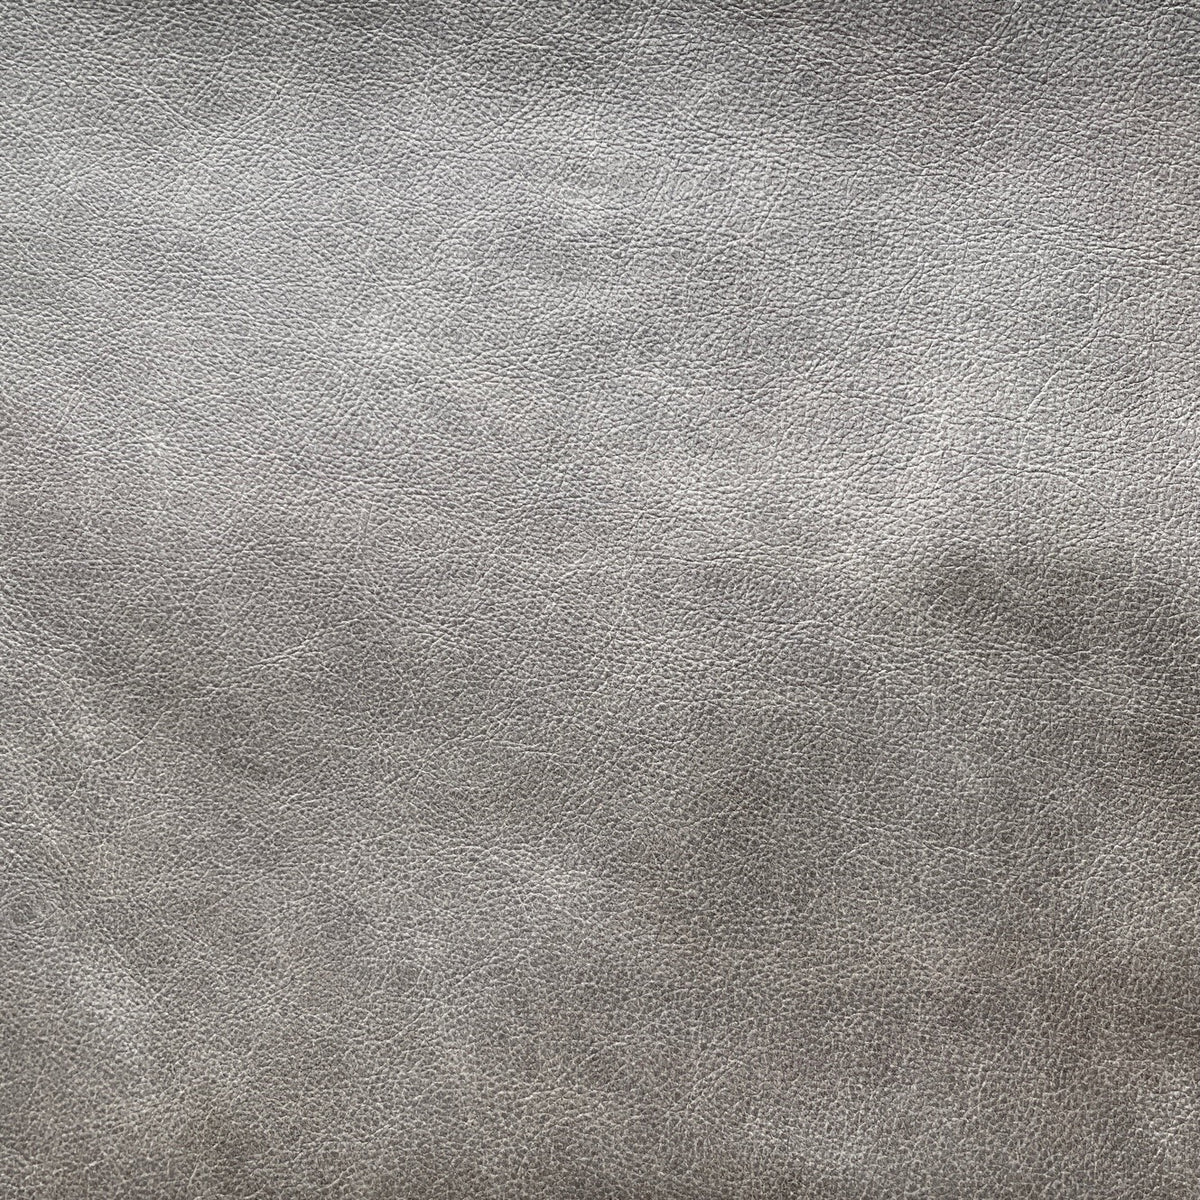 Upholstery Cow Hide #27 | Grey | 1.0mm | 47 sq.ft | From $325 ea.